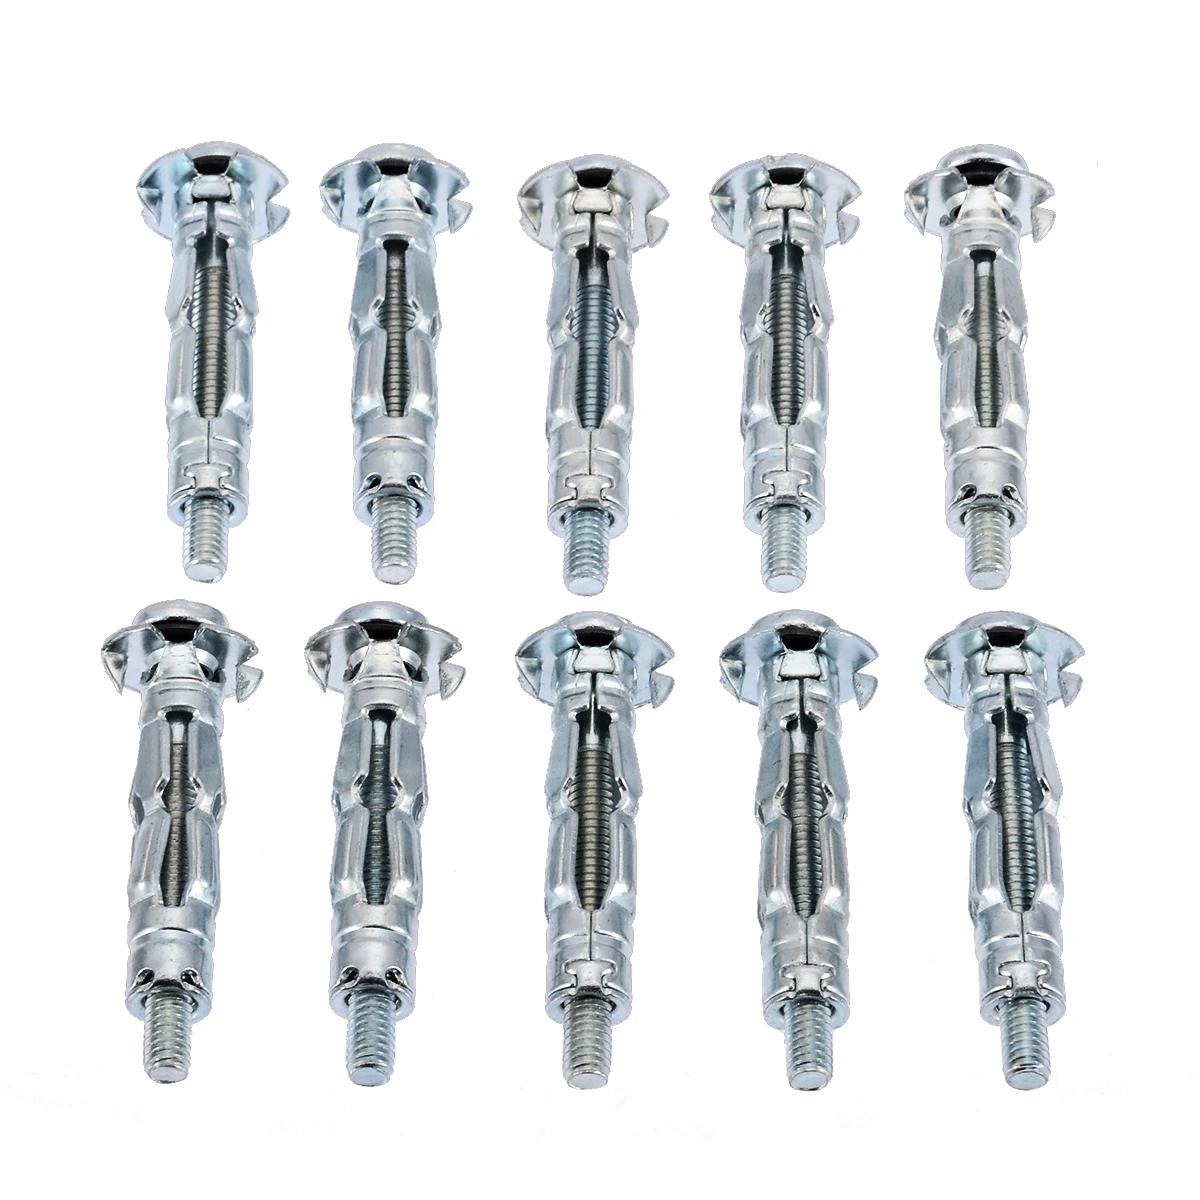 10PCS Expansion Anchor For Drywall Expansion Anchor Bolt Rawl Plugs 